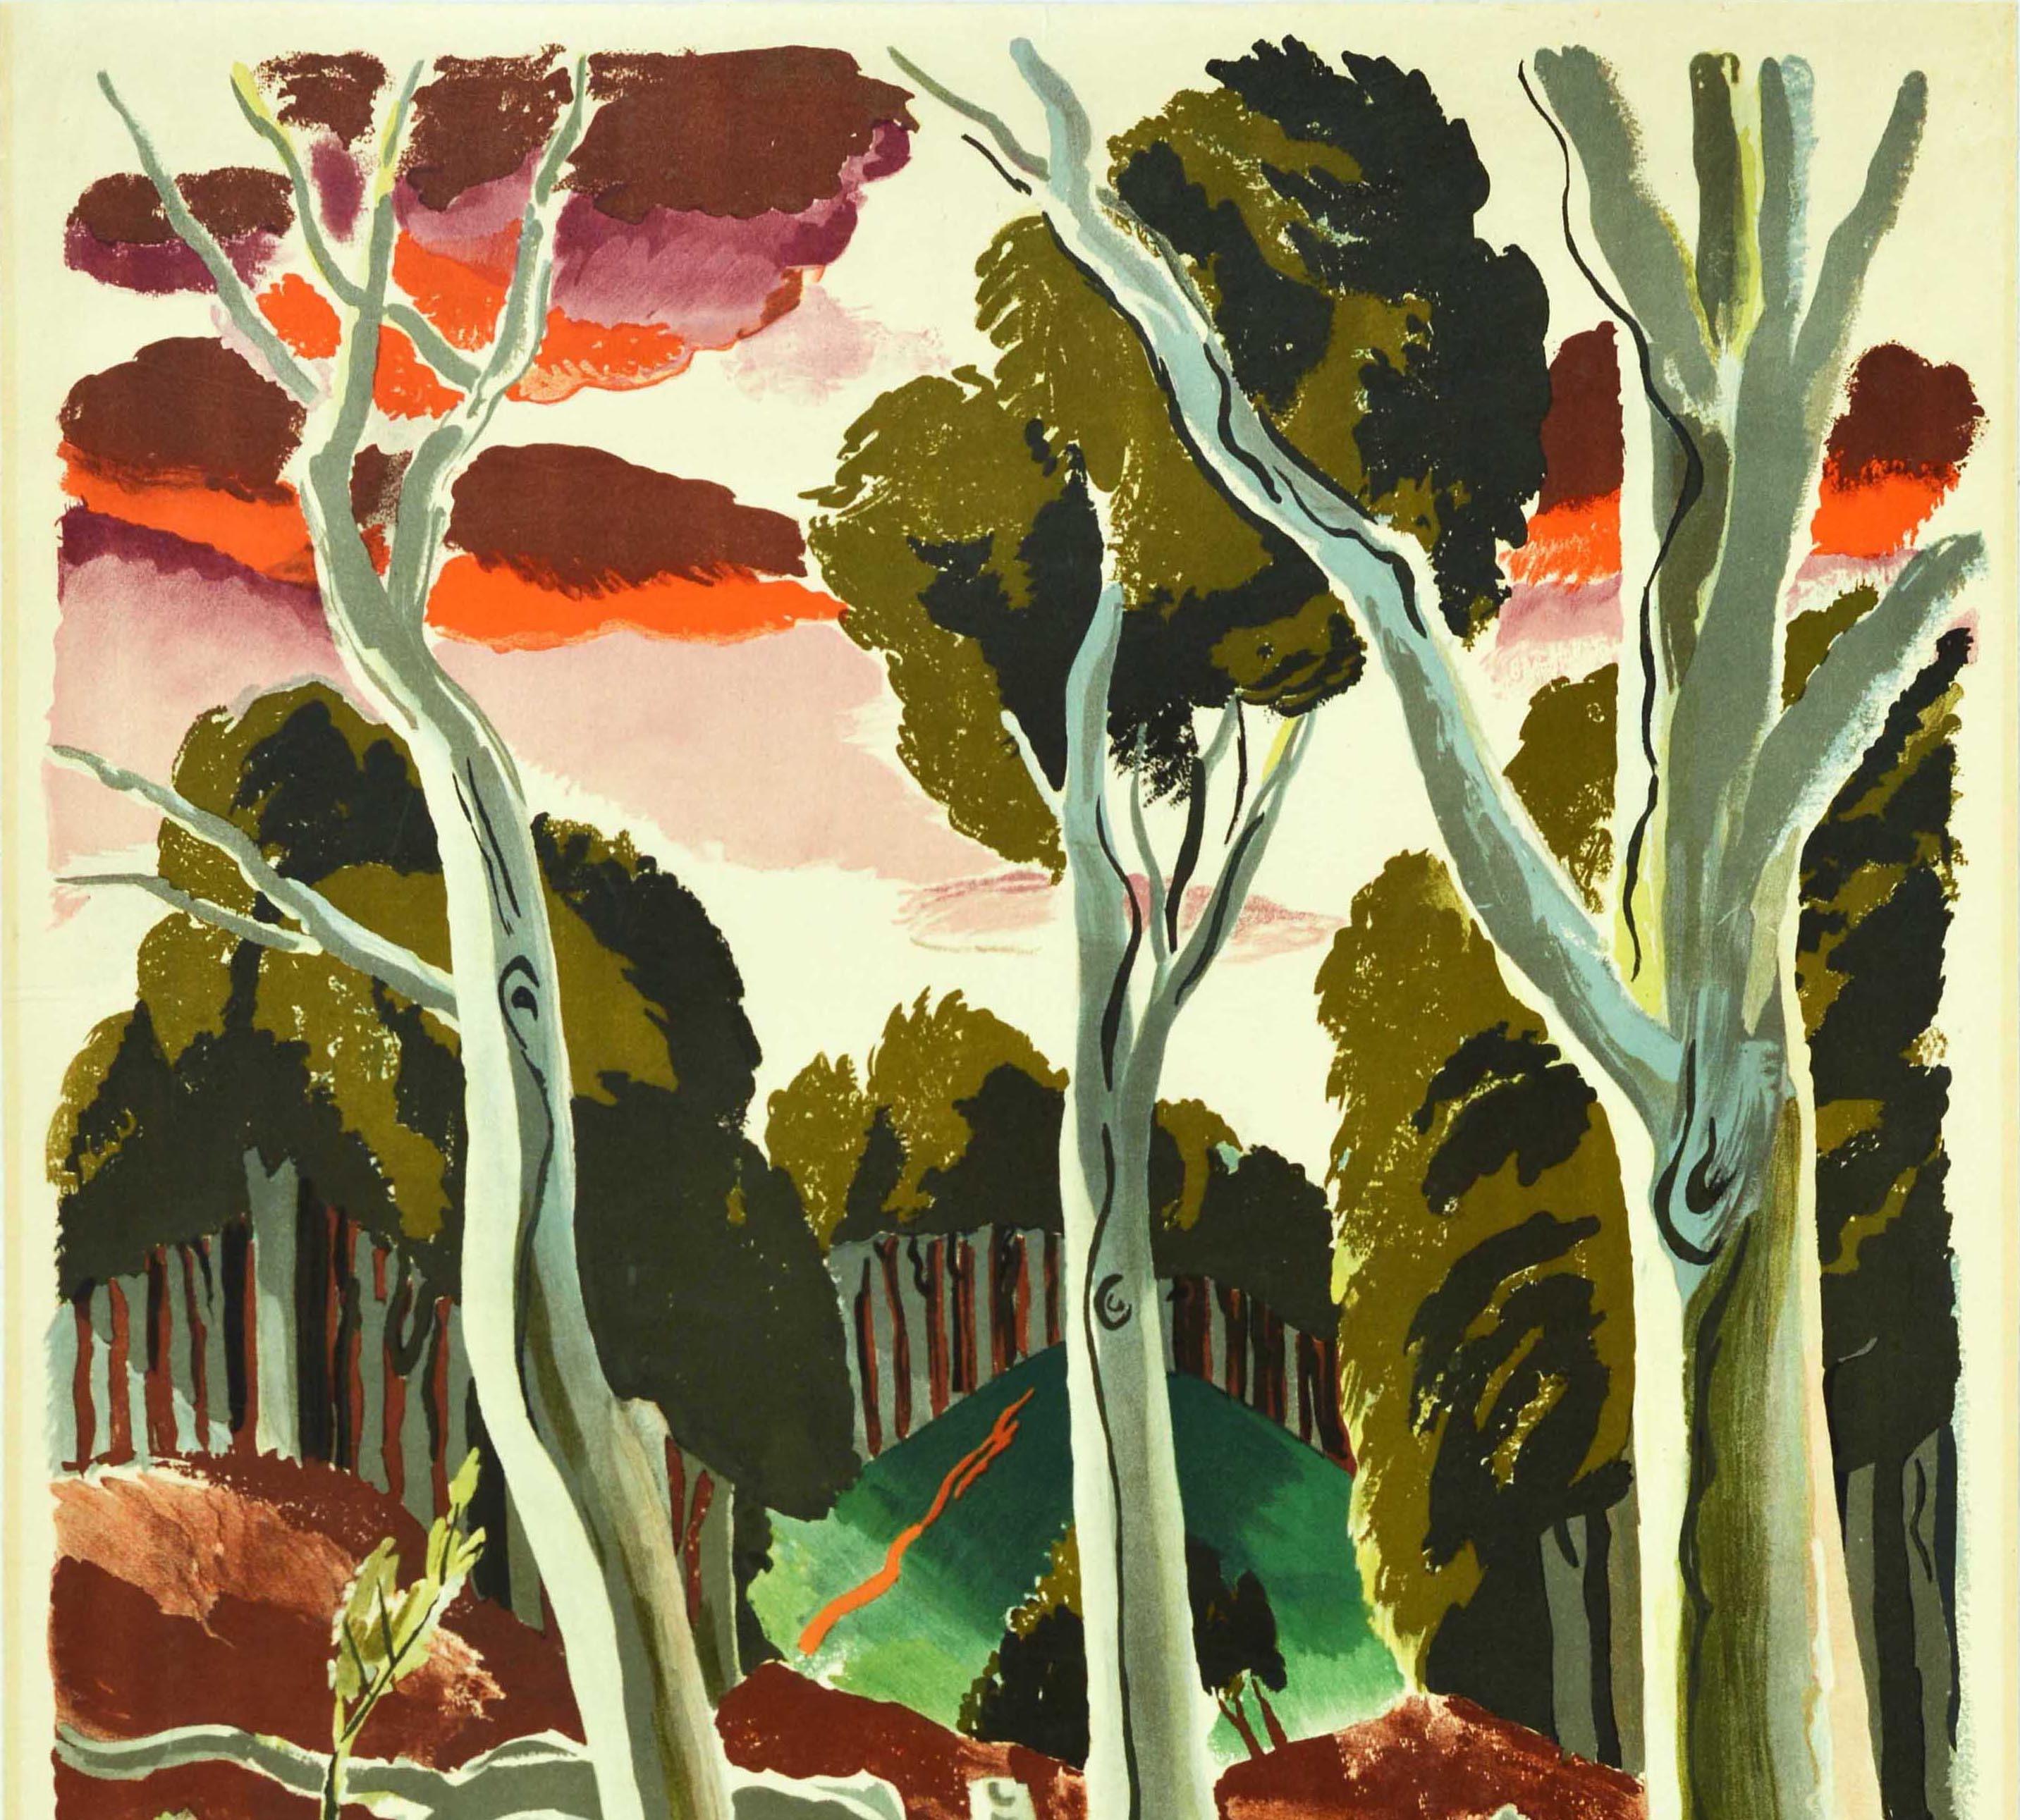 Original vintage London Transport travel poster - At London's Service - featuring a colourful illustration by the British poster designer and artist Clive Gardiner (1891-1960) depicting a scenic view of the historic Epping Forest showing trees